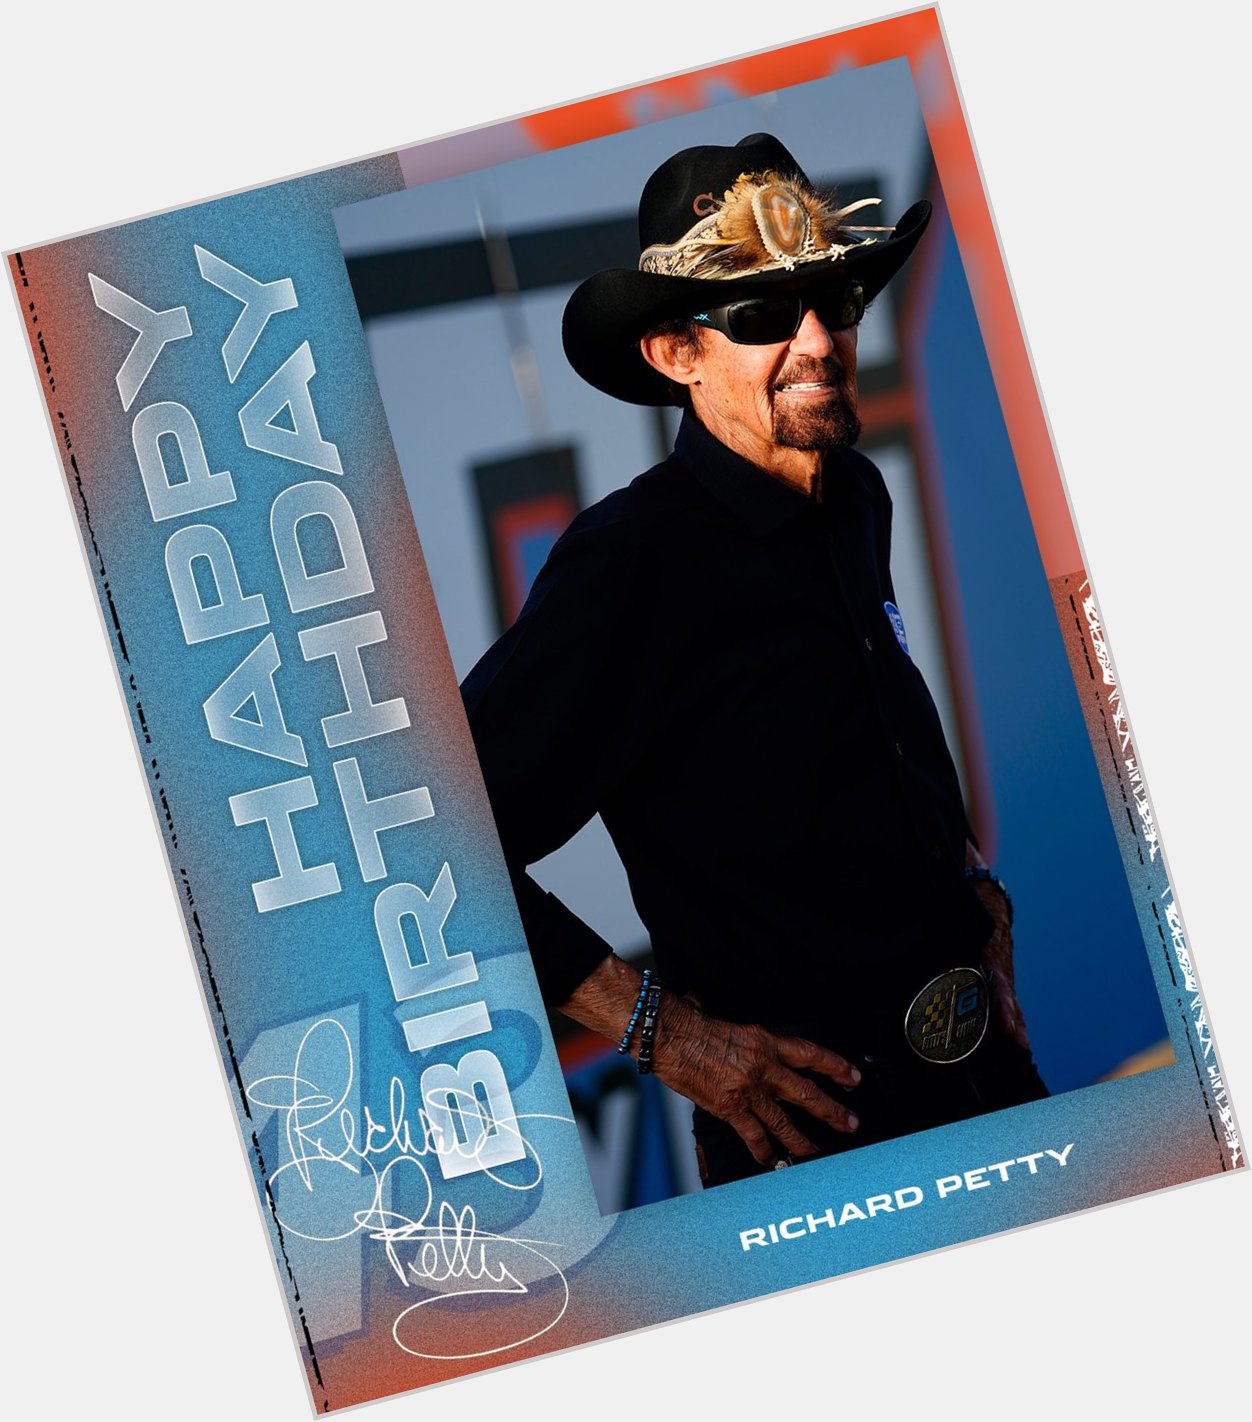 All hail The King! Remessage to wish Richard Petty a happy 85th birthday!  